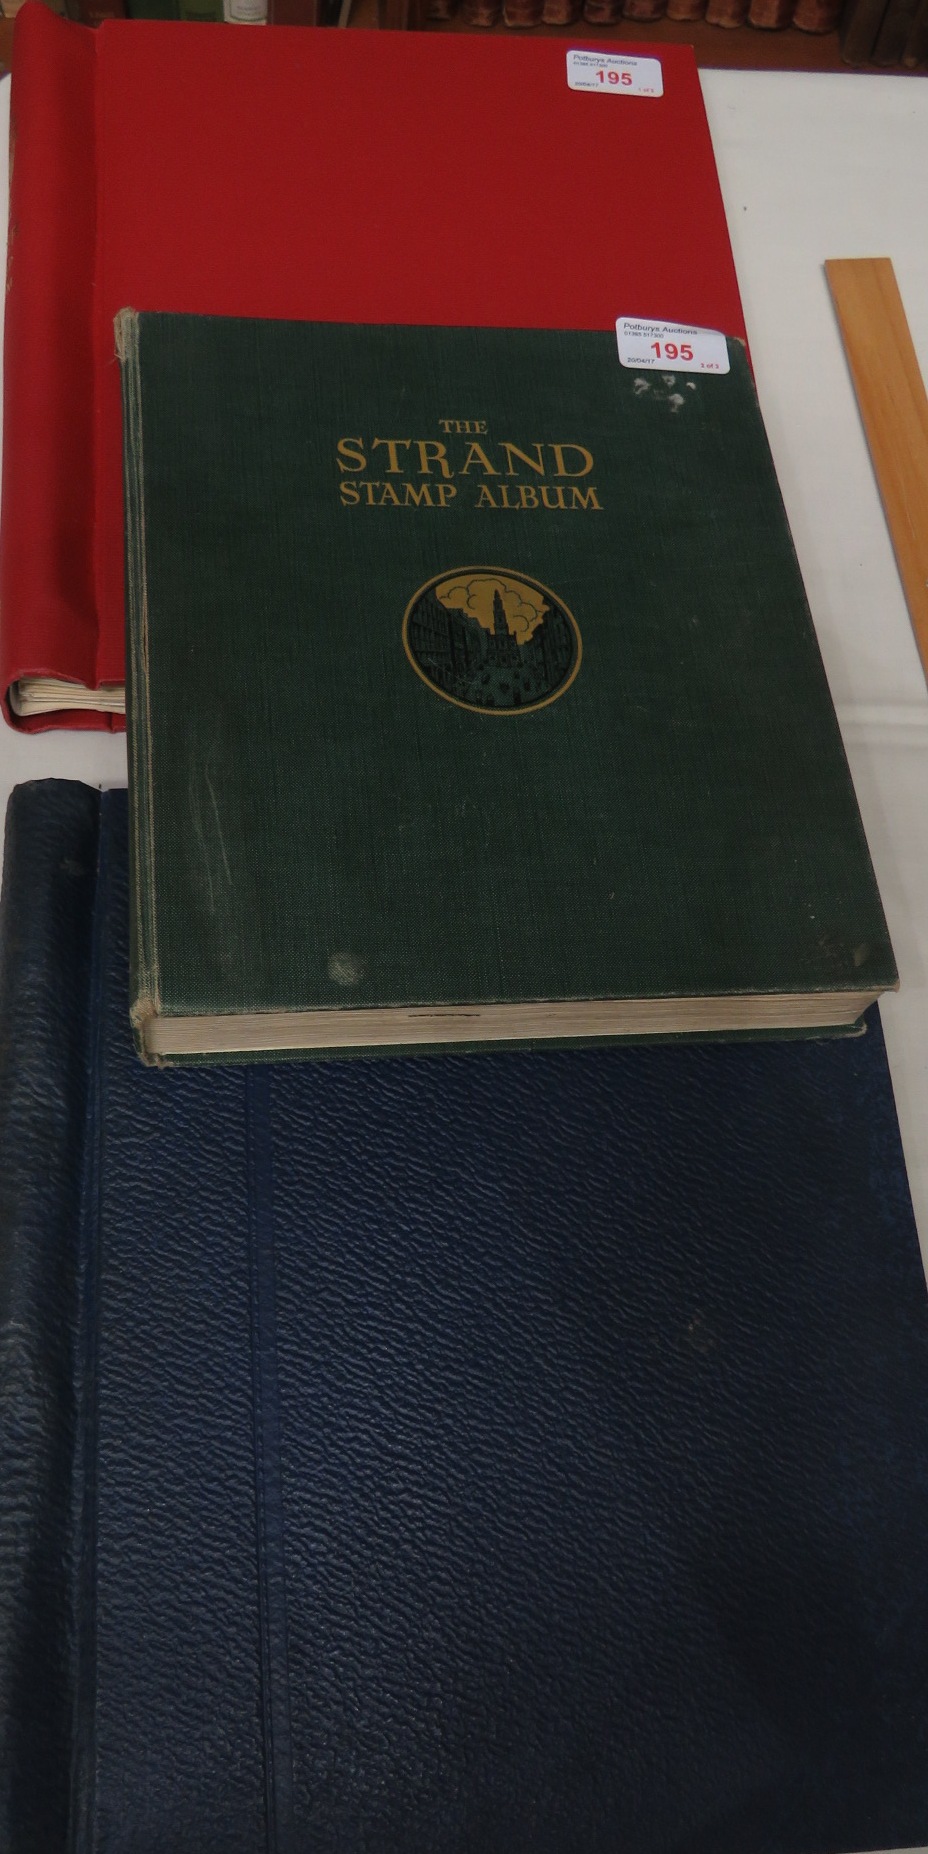 A red Tower stamp album containing early Canadian, New Zealand, Irish Free State over stamped